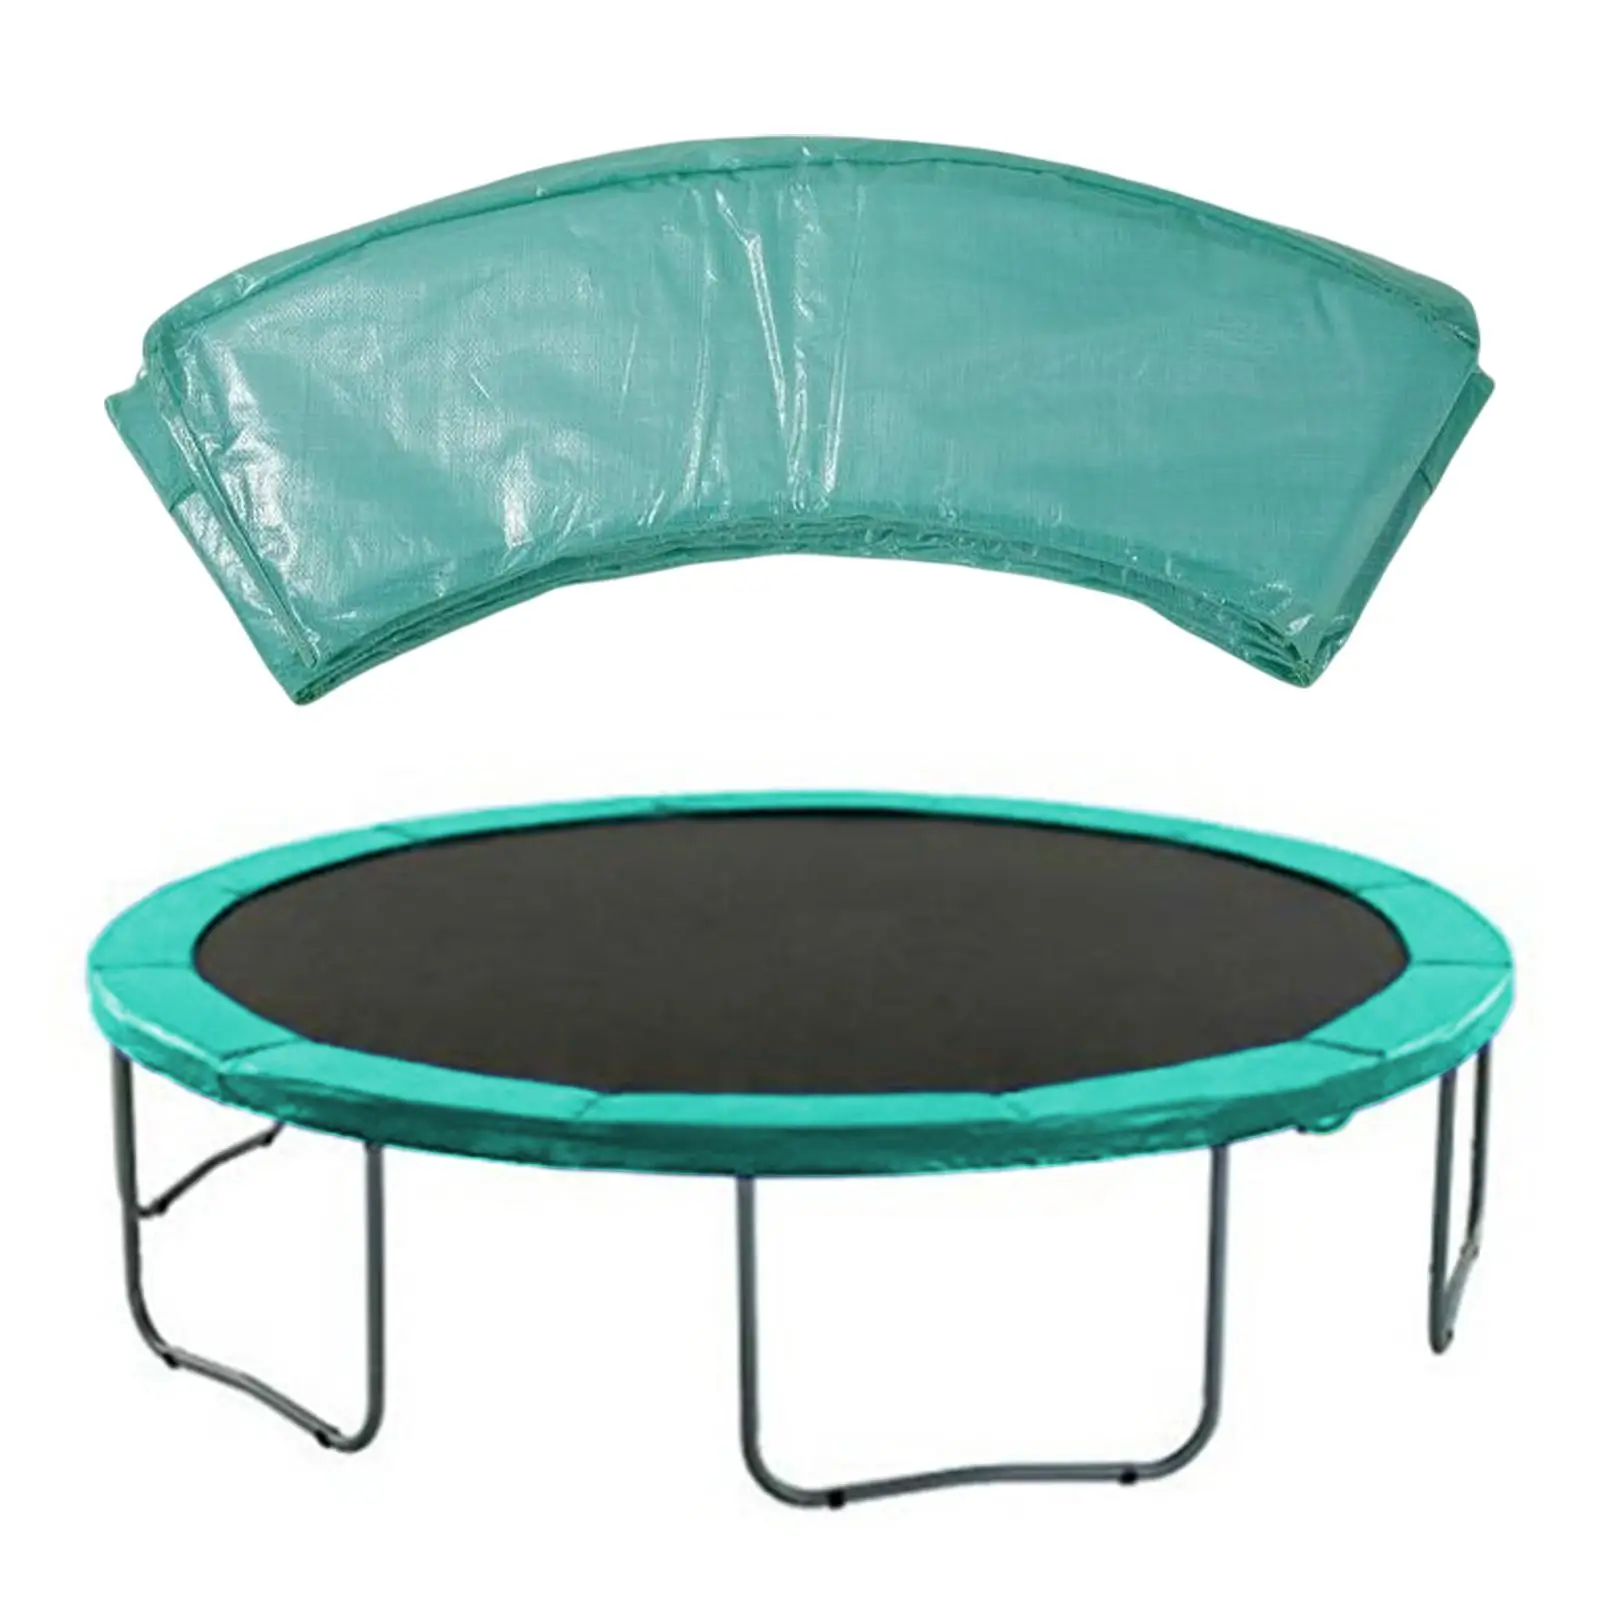 Spring Trampoline Outer Circumference Pad for Trampoline Frames